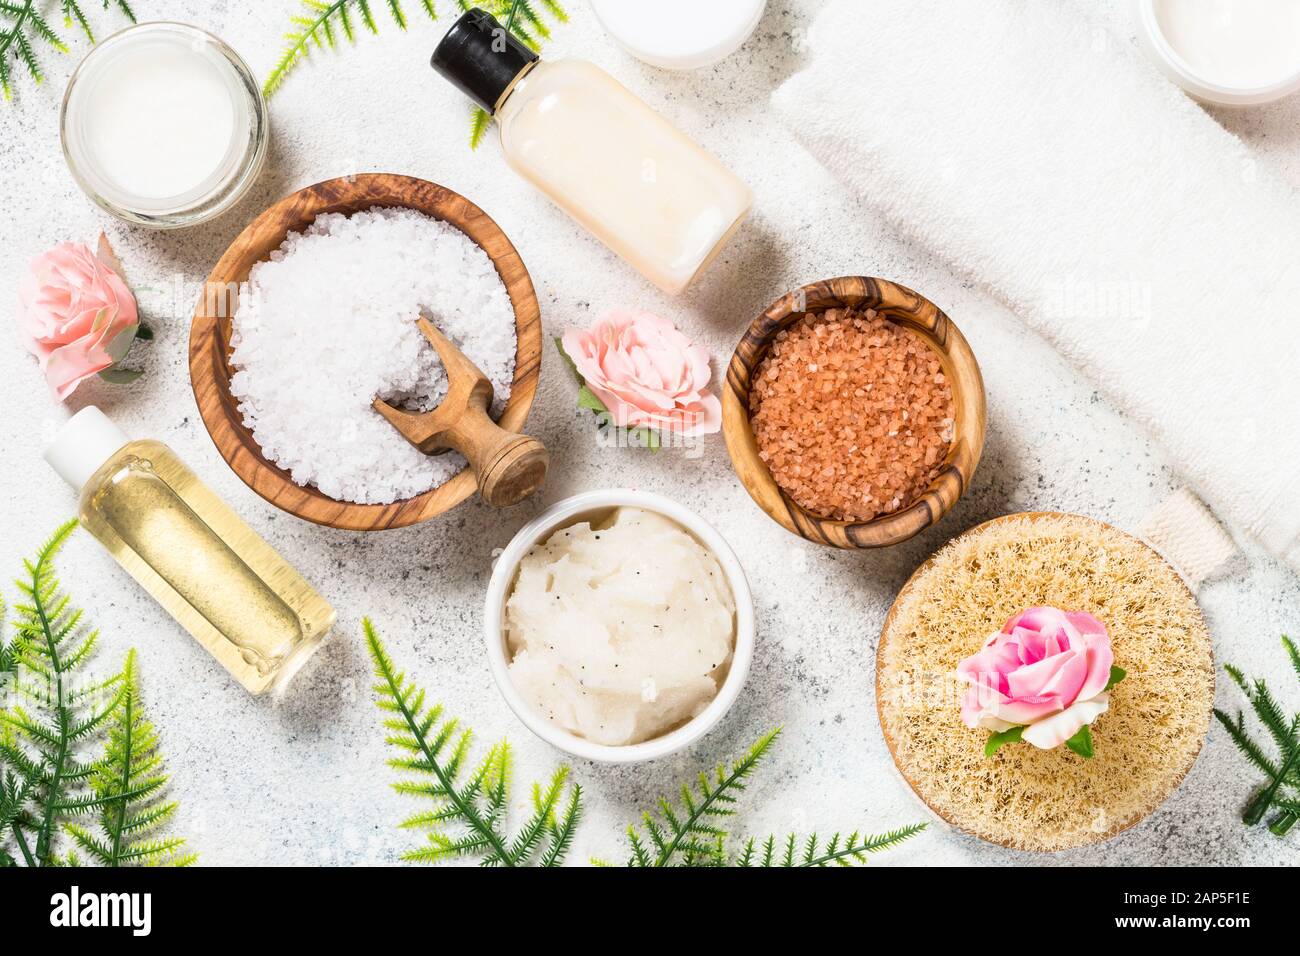 Natural cosmetic product, wellness and spa product. Stock Photo